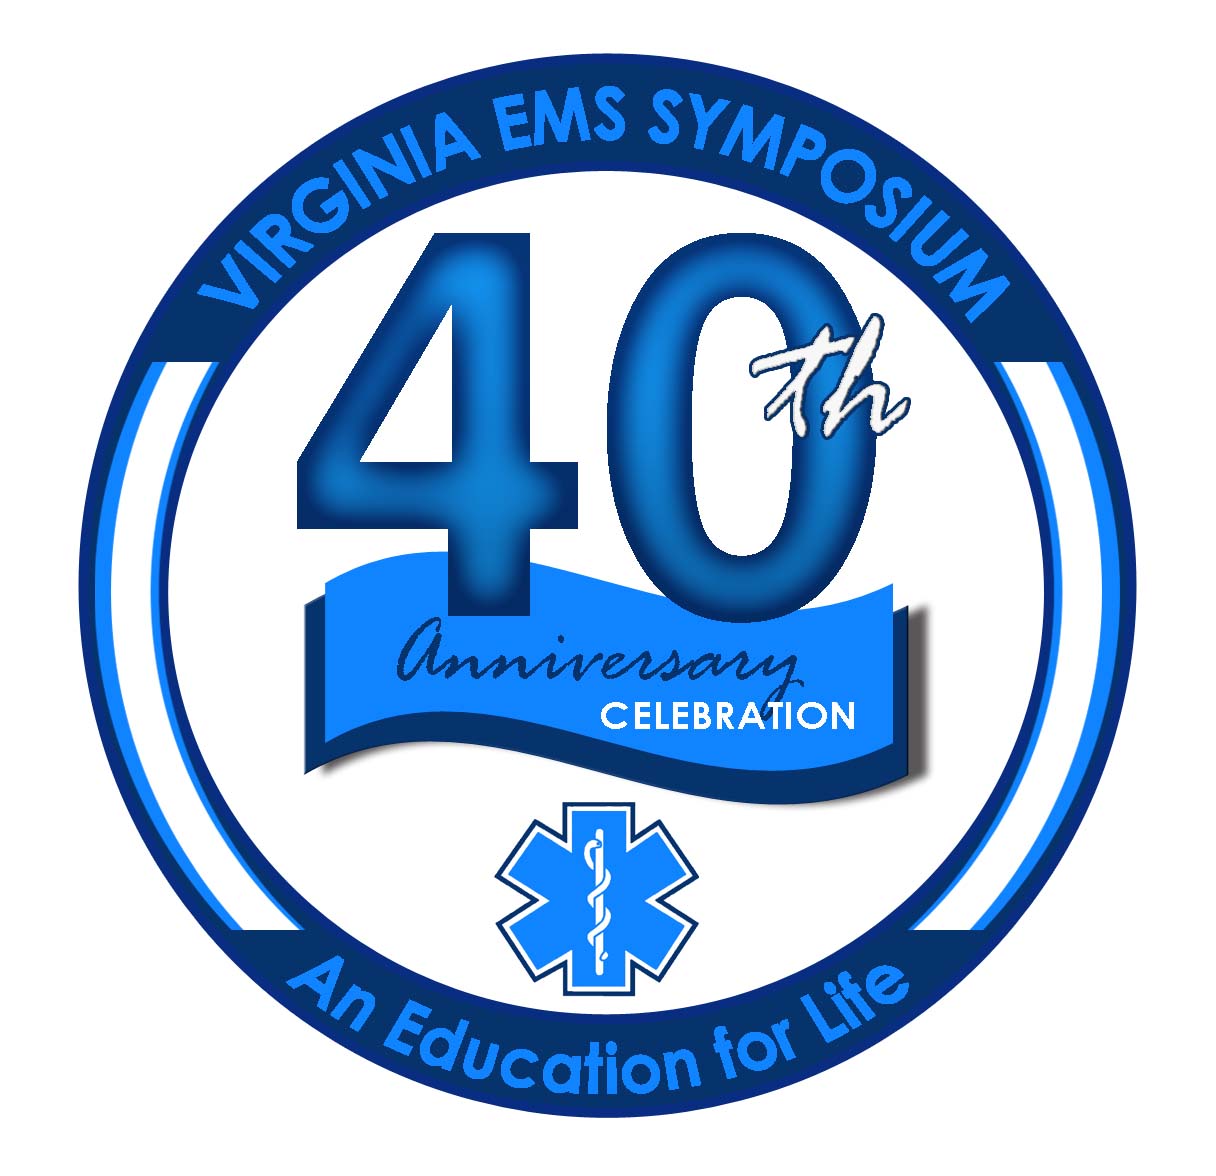 Lodging and Event Updates for the Virginia EMS Symposium Emergency